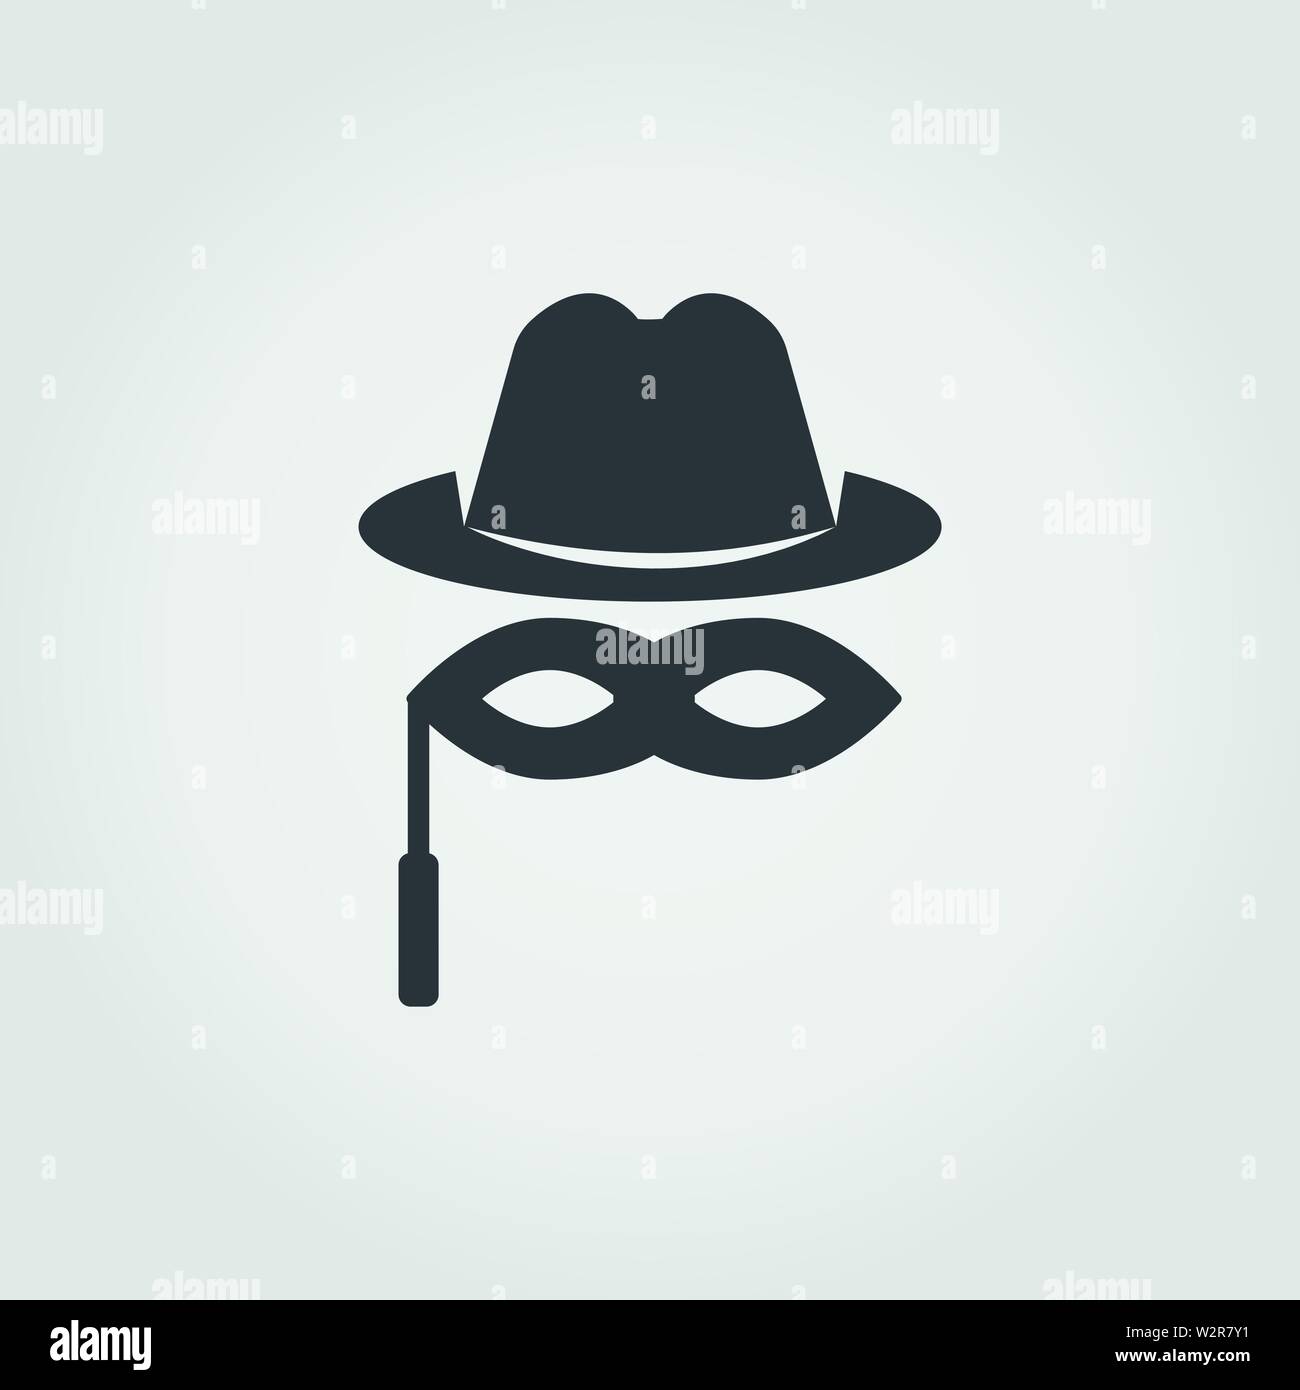 Anonymity flat icon. Monochrome creative design from blockchain icons collection. Simple sign illustration anonymity icon for mobile and web usage Stock Vector